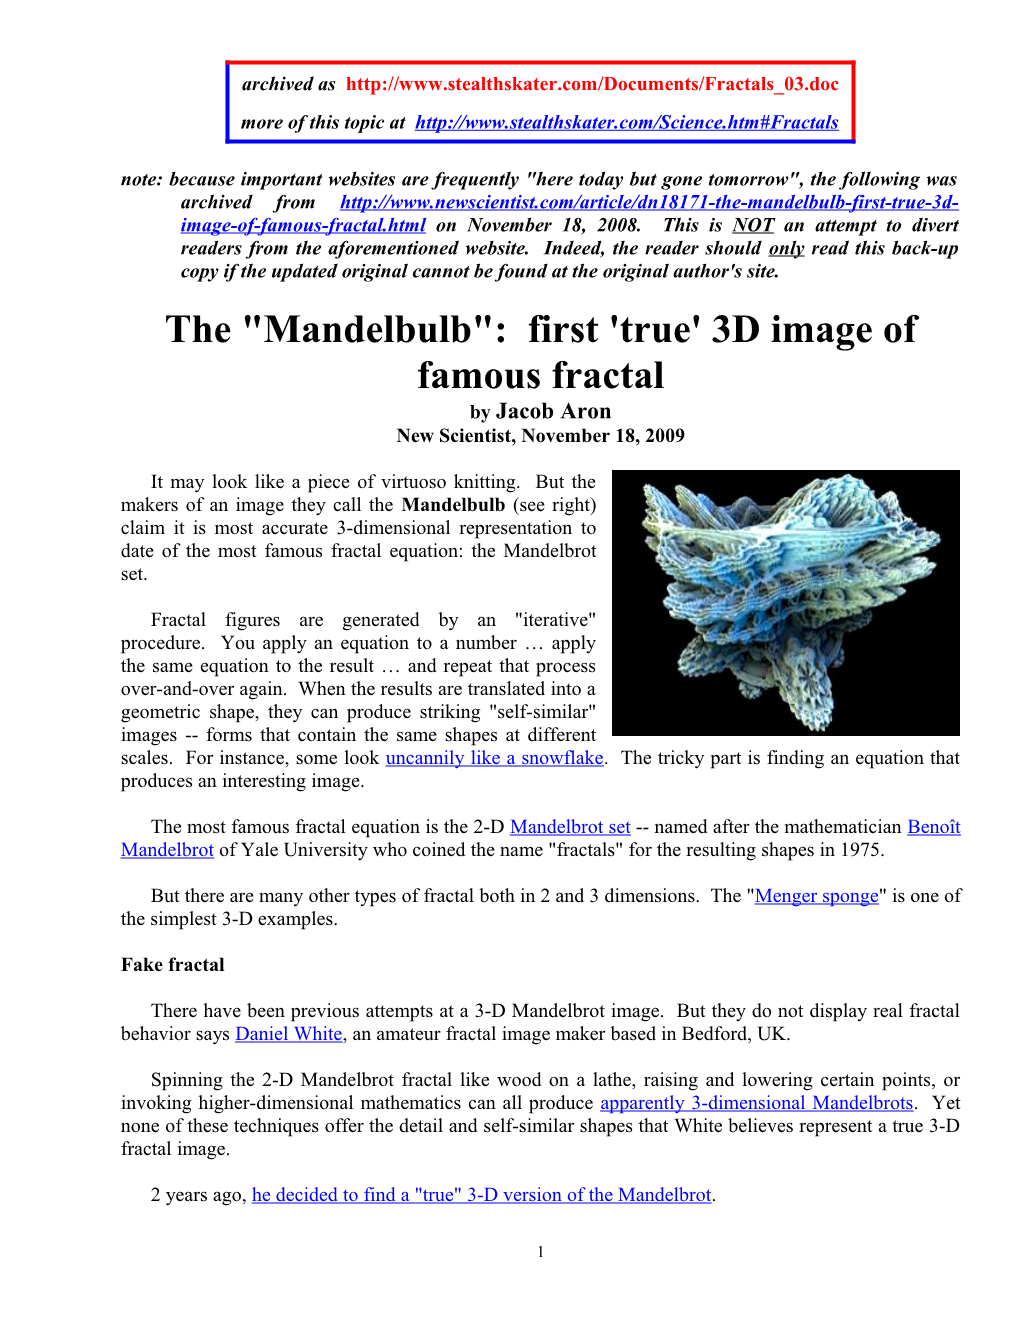 The Mandelbulb : First 'True' 3D Image of Famous Fractal